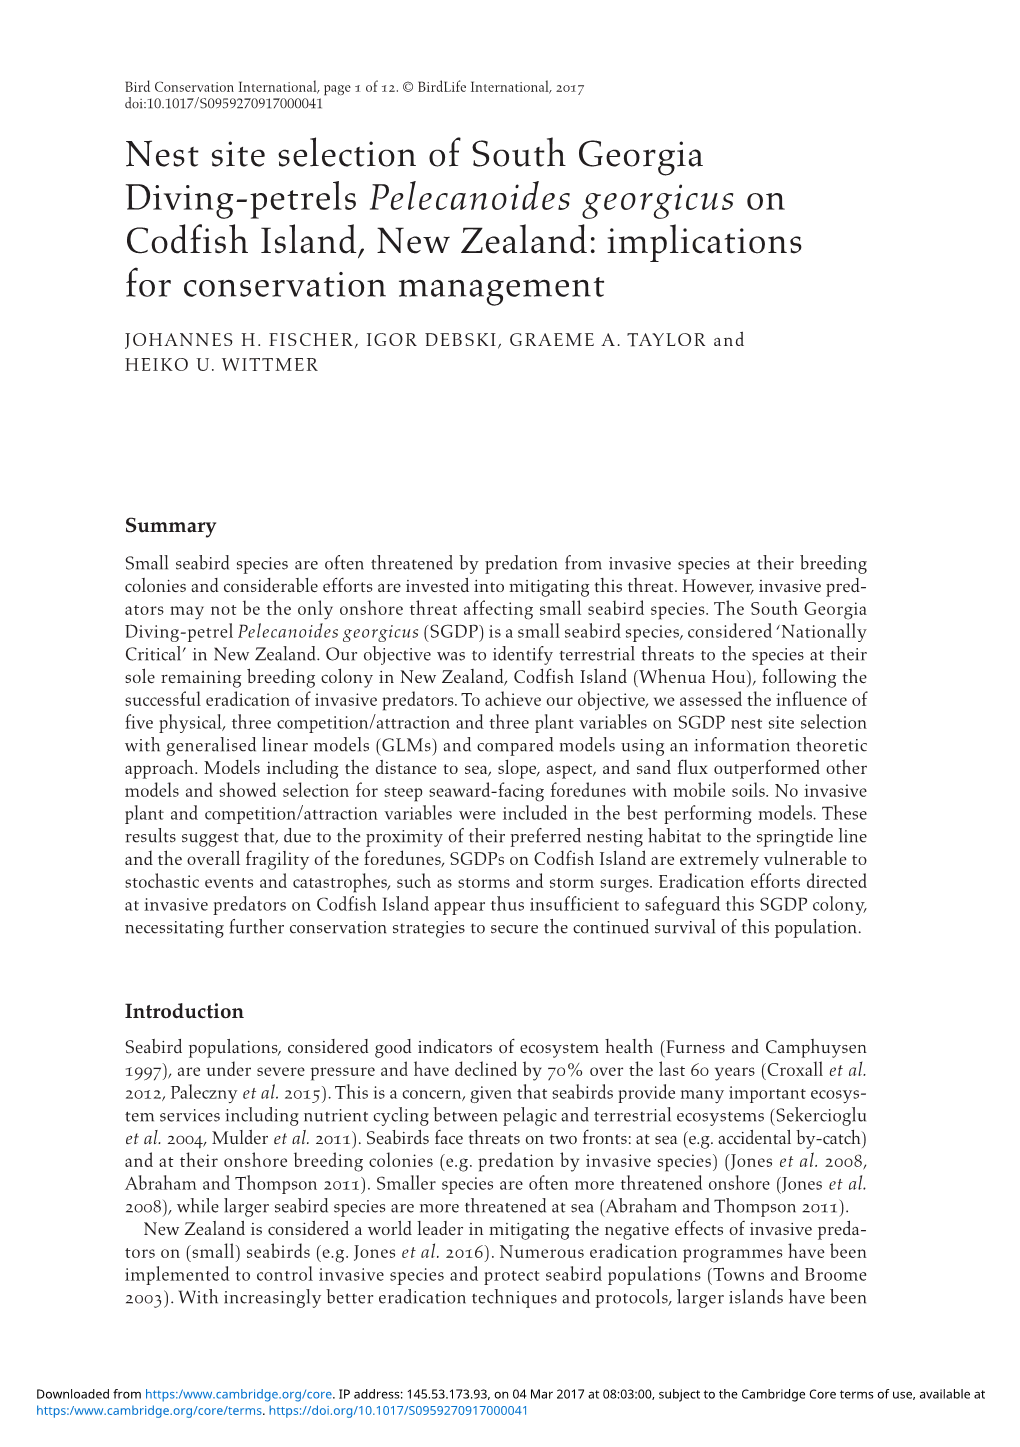 Nest Site Selection of South Georgia Diving-Petrels Pelecanoides Georgicus on Codfish Island, New Zealand: Implications for Conservation Management